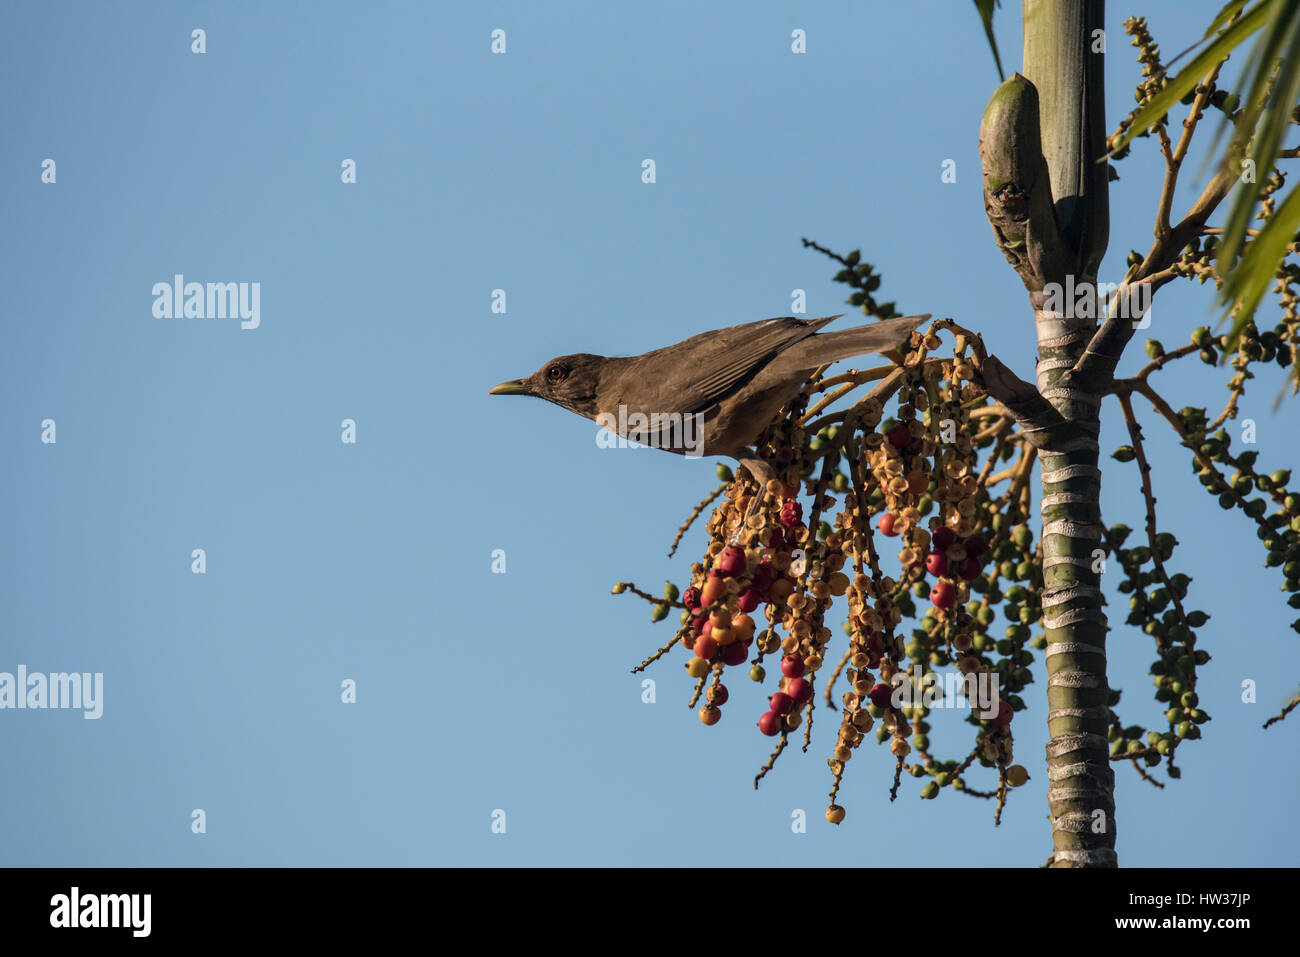 A Clay-colored Robin/ Thrush (Turdus grayi) feeding on the fruits of a palm Stock Photo